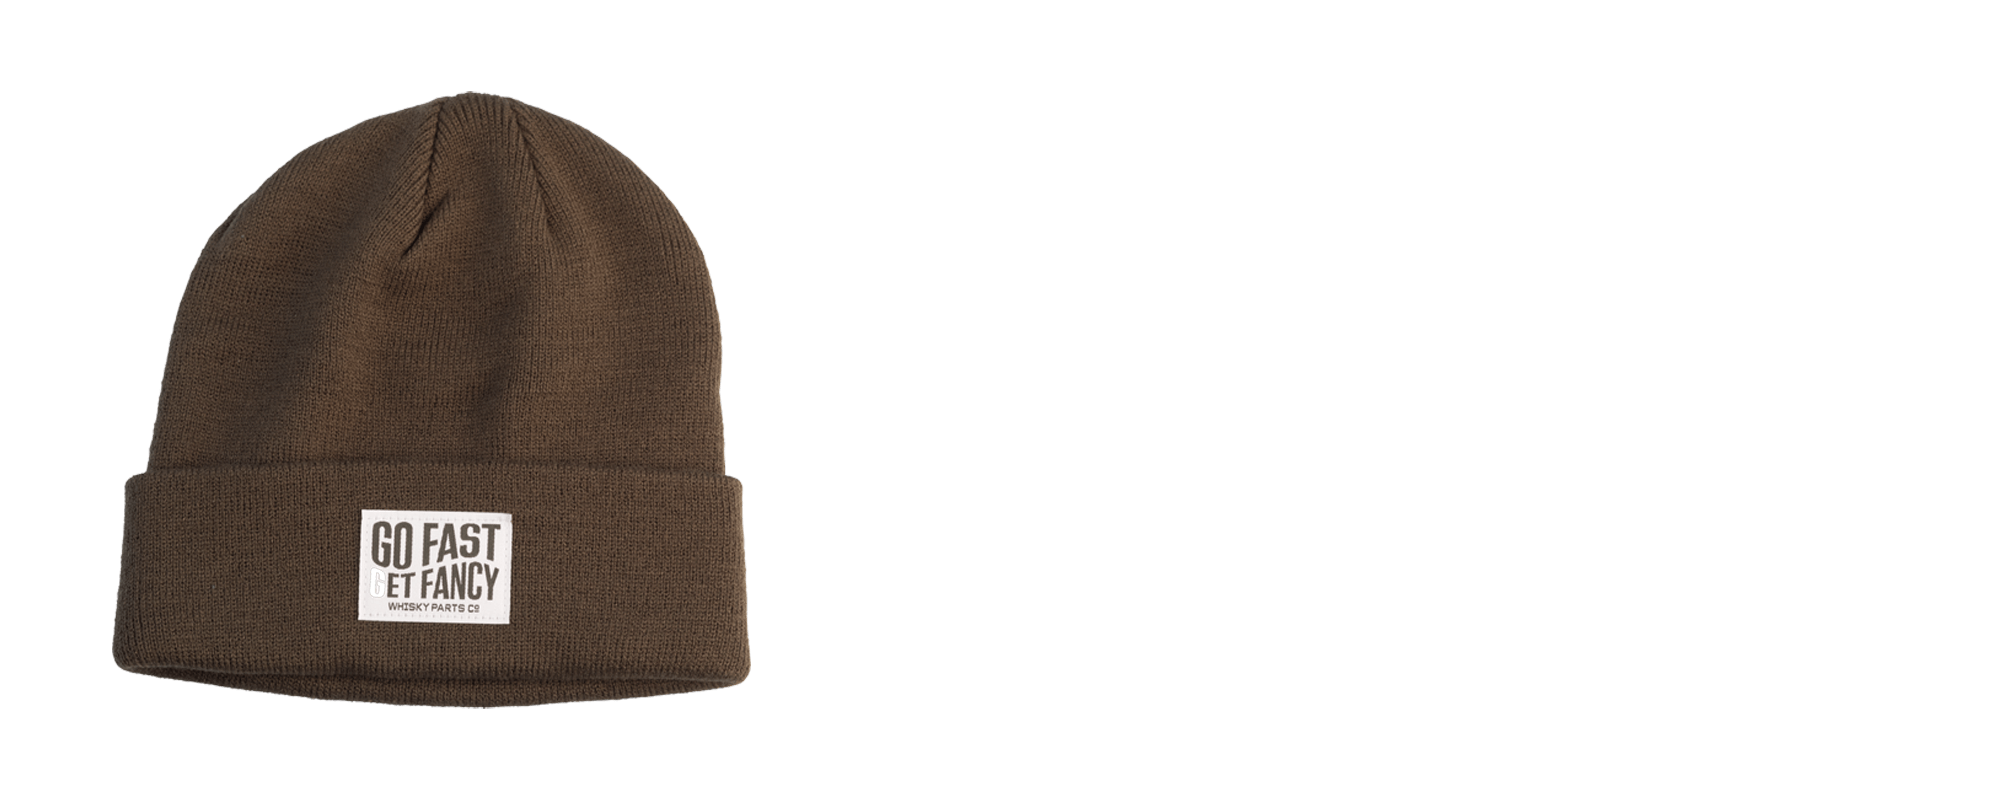 Whisky Go Fast Get Fancy Beanie - Military Green - front view